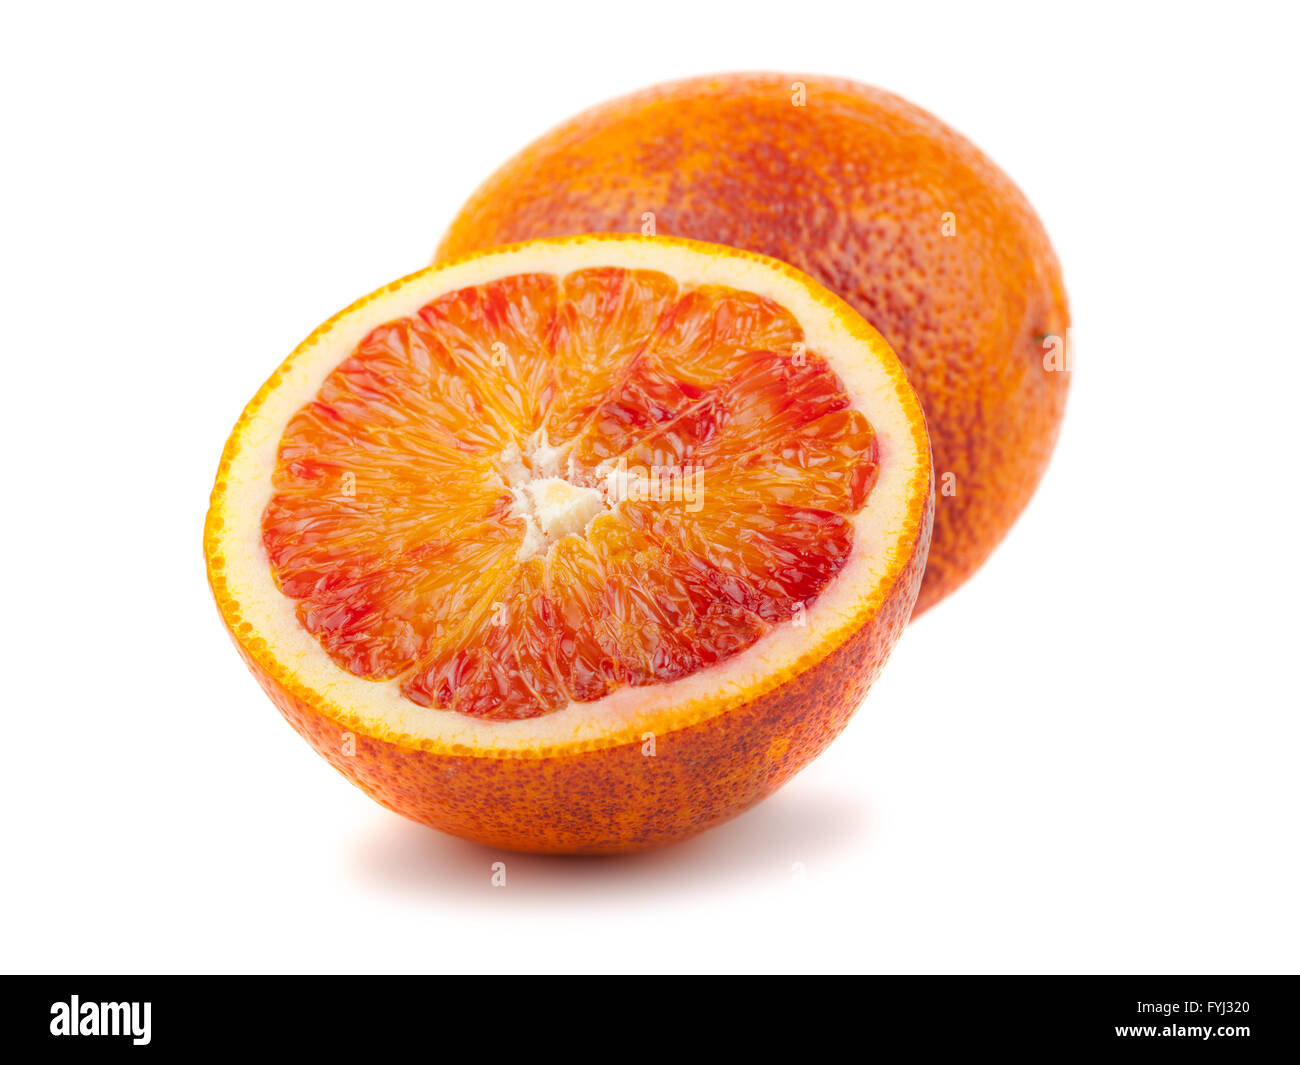 Half and full bloody red oranges Stock Photo